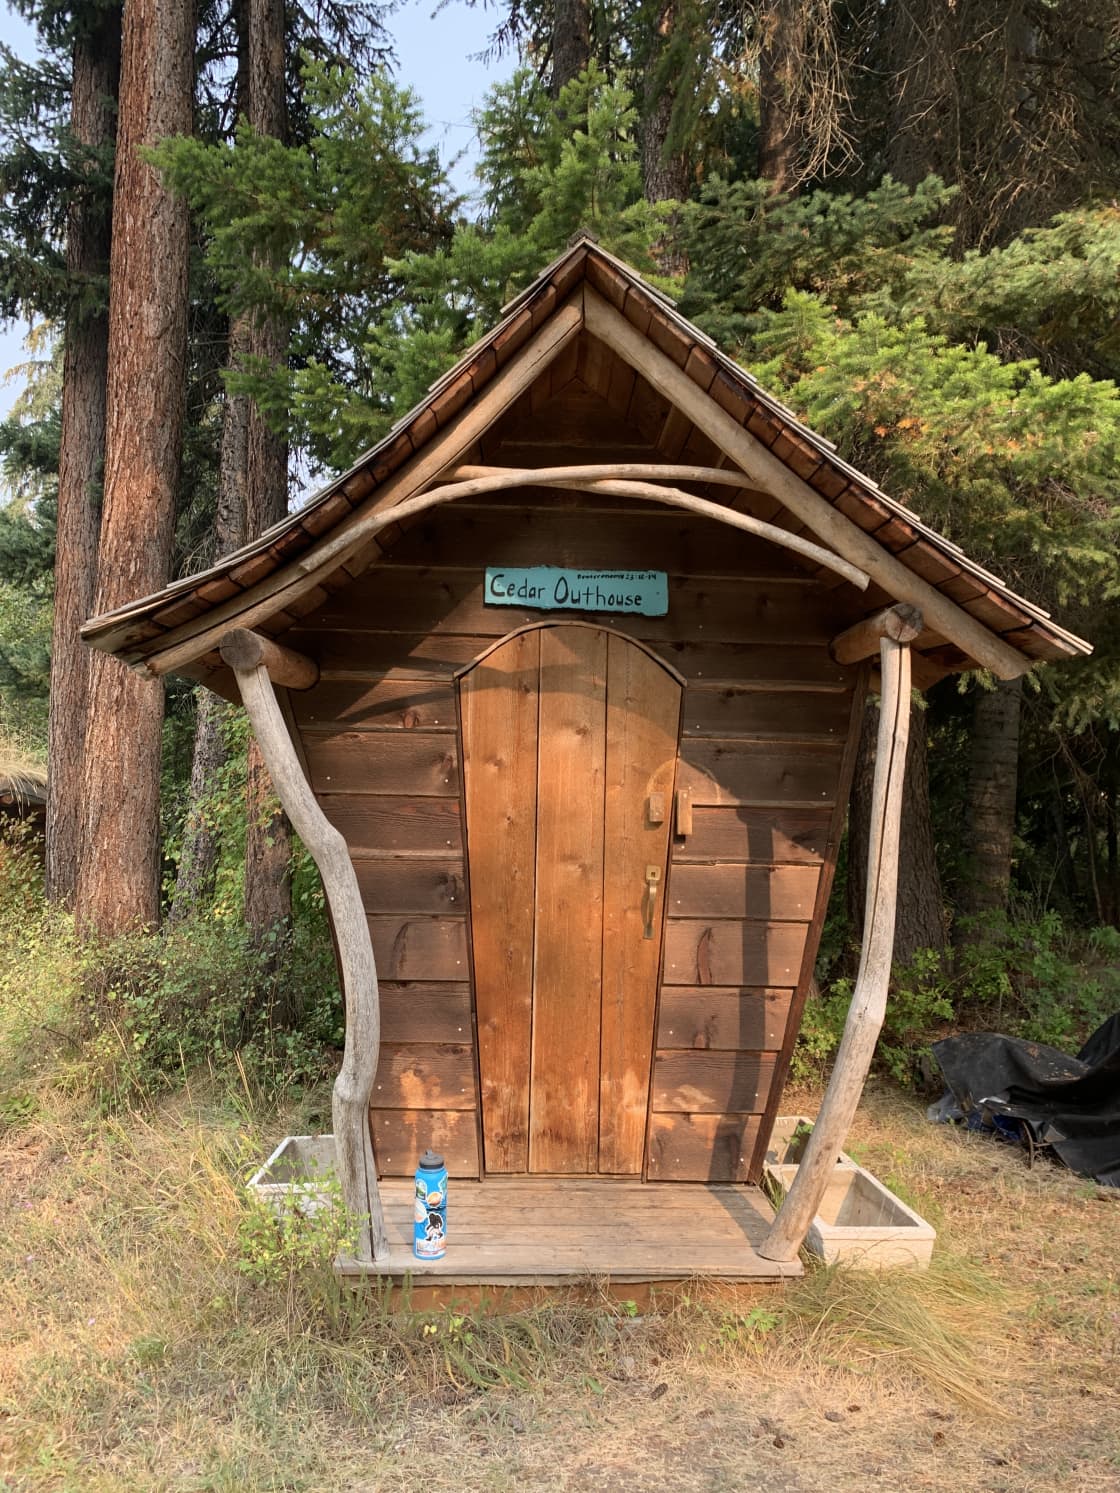 The all important sawdust outhouse